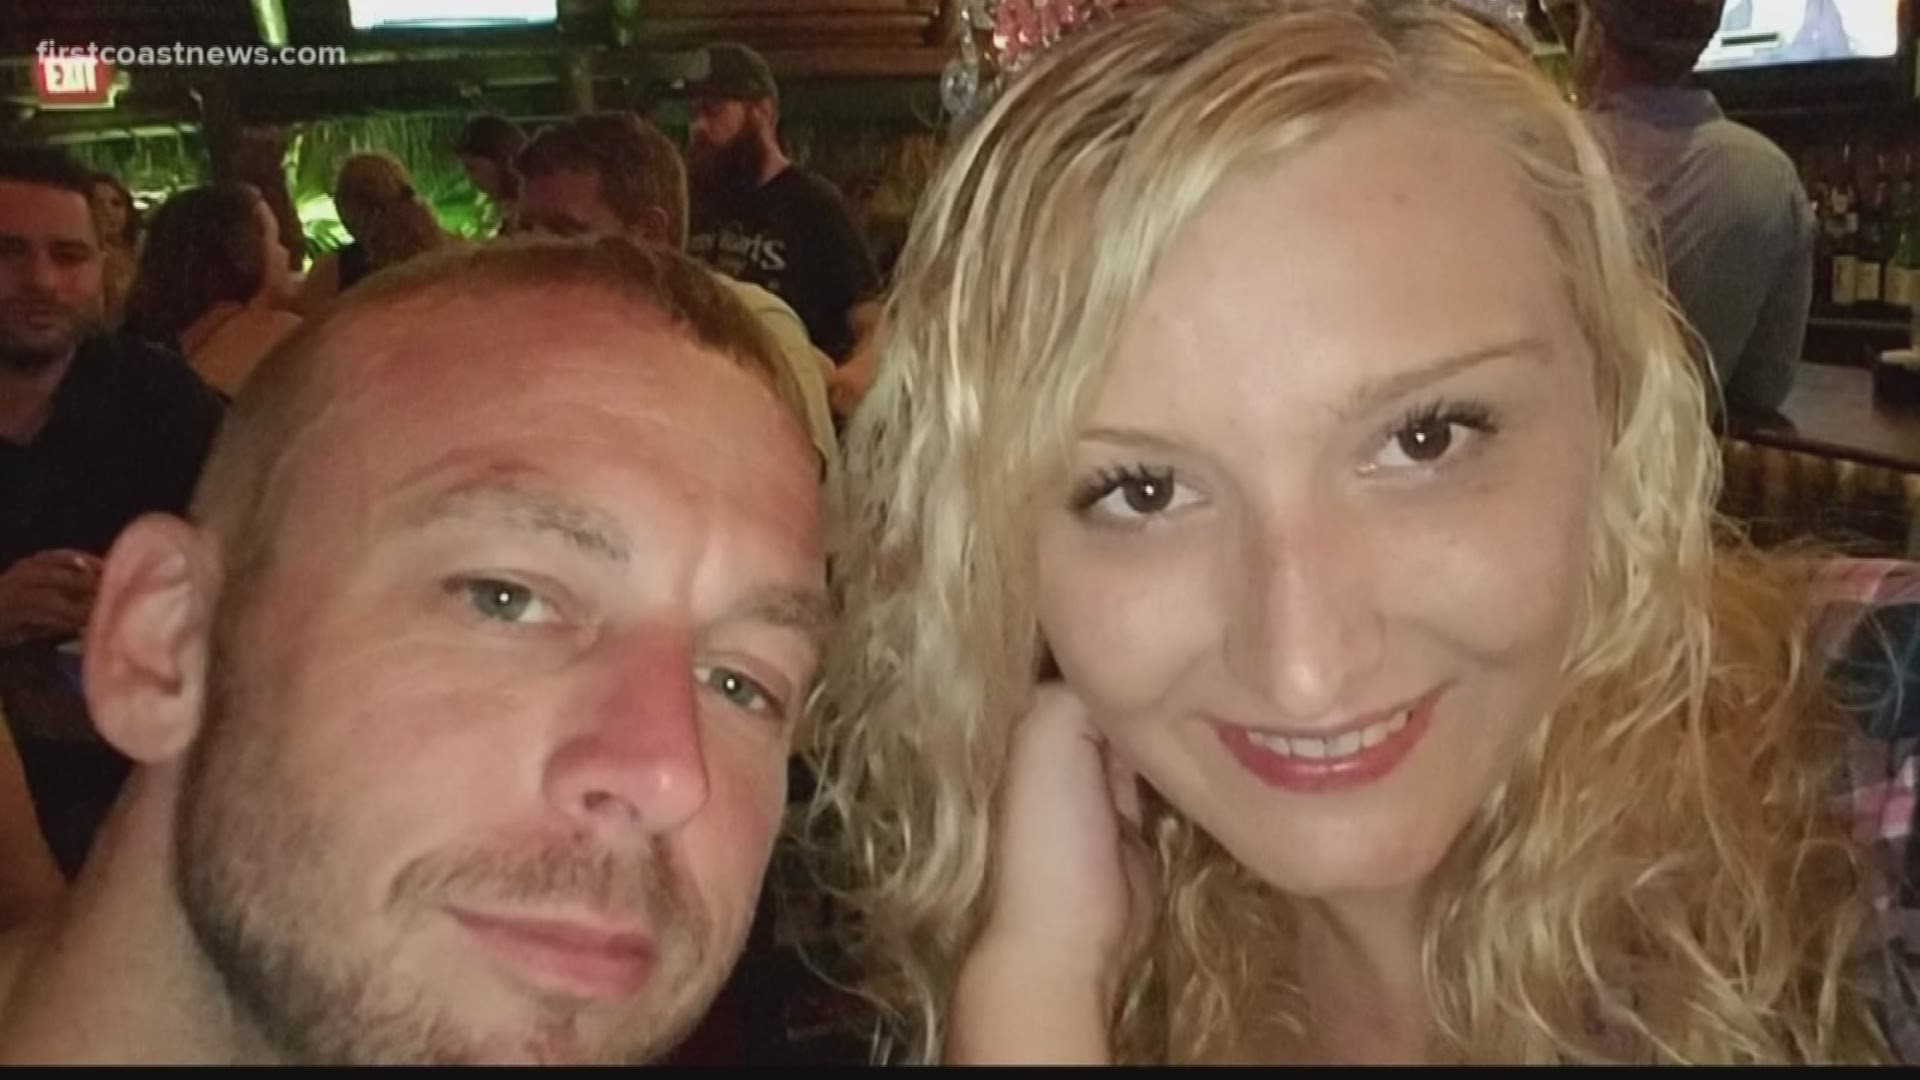 The family of a victim in a deadly DUI crash spoke to First Coast News.